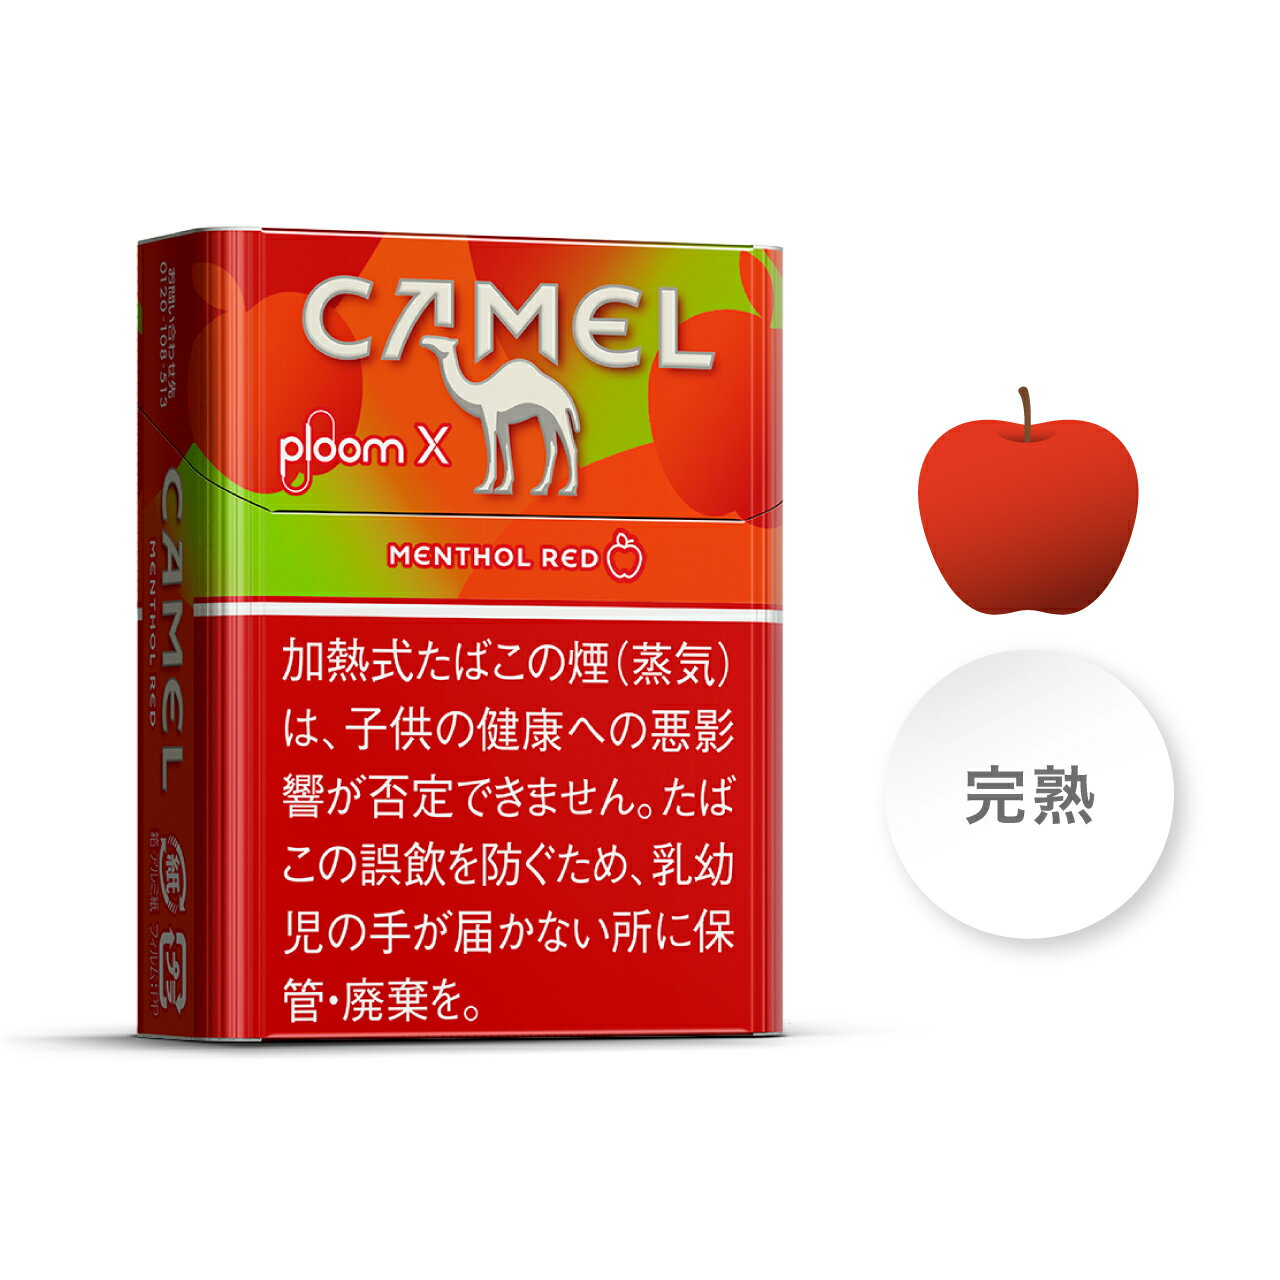 international delivery available 100Sticks Camel Menthol Red Ploom X